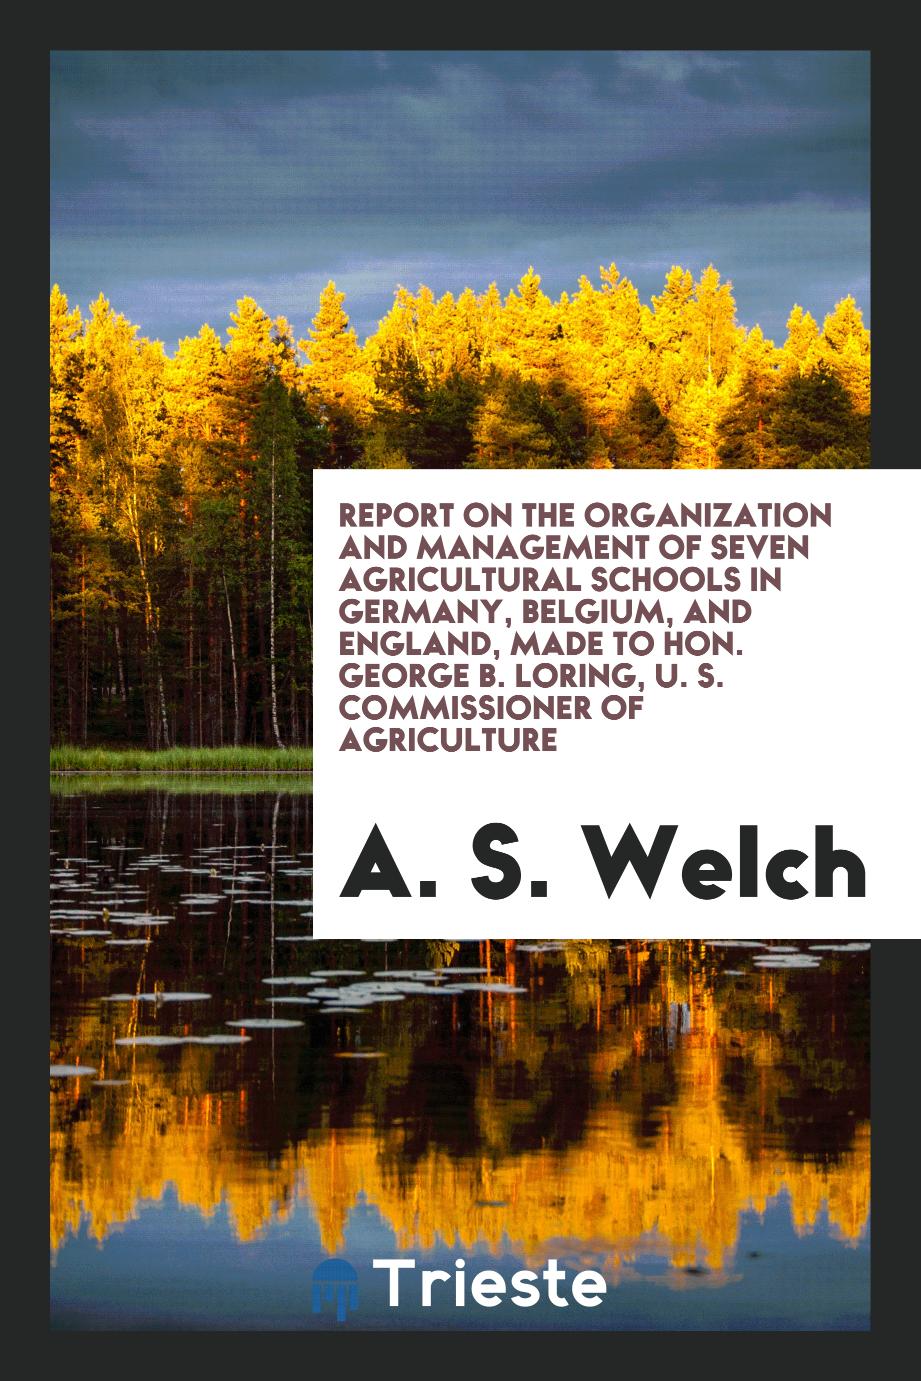 Report on the Organization and Management of Seven Agricultural Schools in Germany, Belgium, and England, Made to Hon. George B. Loring, U. S. Commissioner of Agriculture